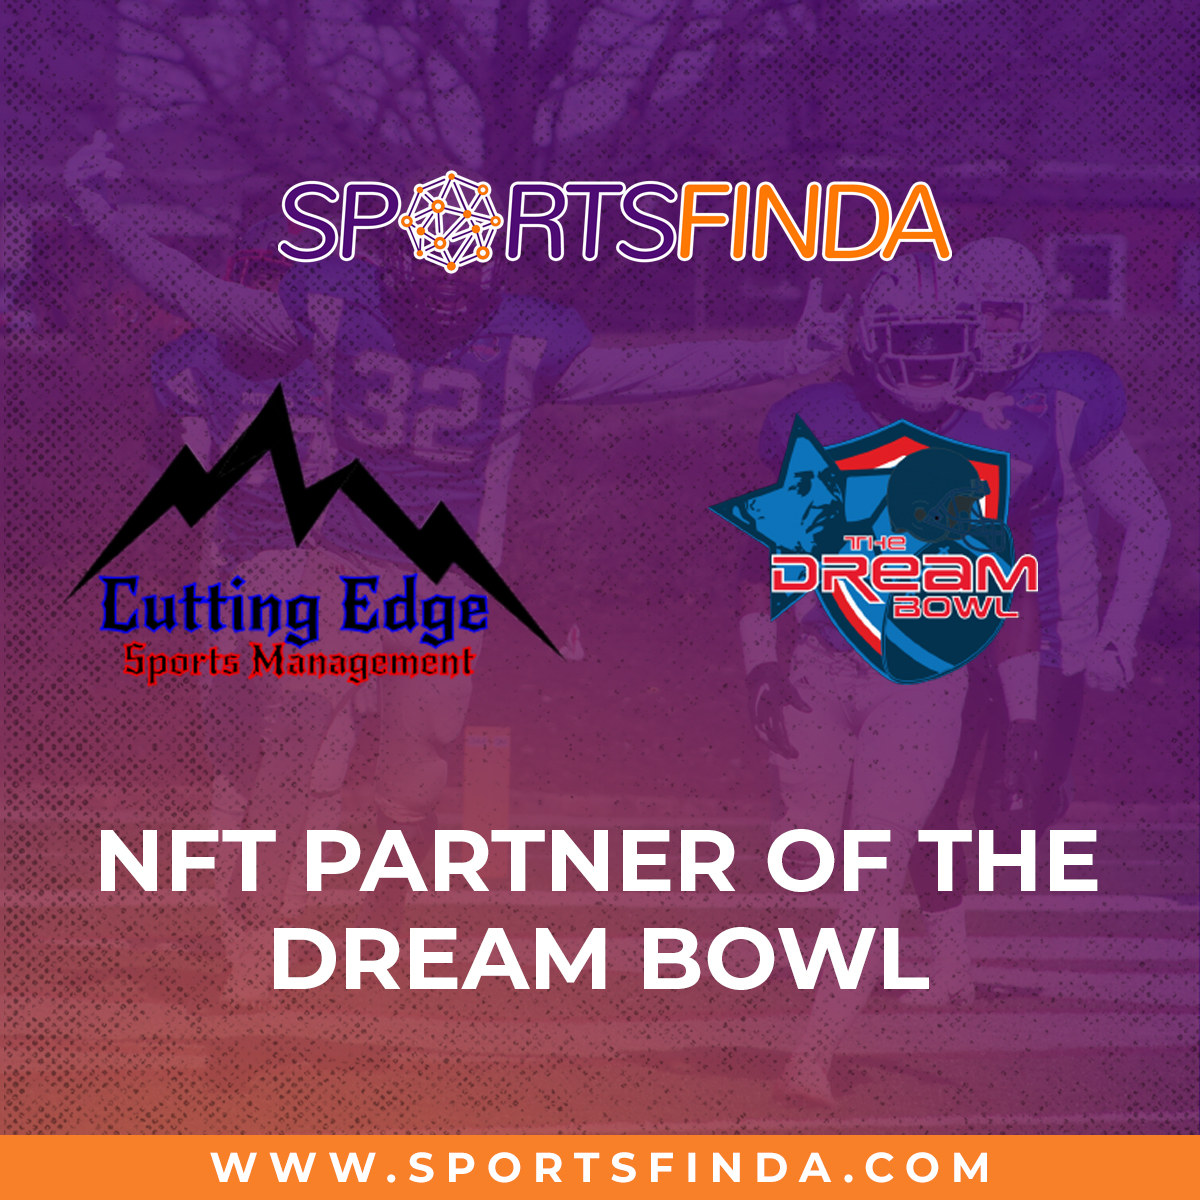 Sportsfinda is excited to announce a new partnership with Cutting Edge Sports Management on a new initiative for Dream Bowl XI for this upcoming January event. Stay tuned for more developments from this first-of-its-kind college football partnership.